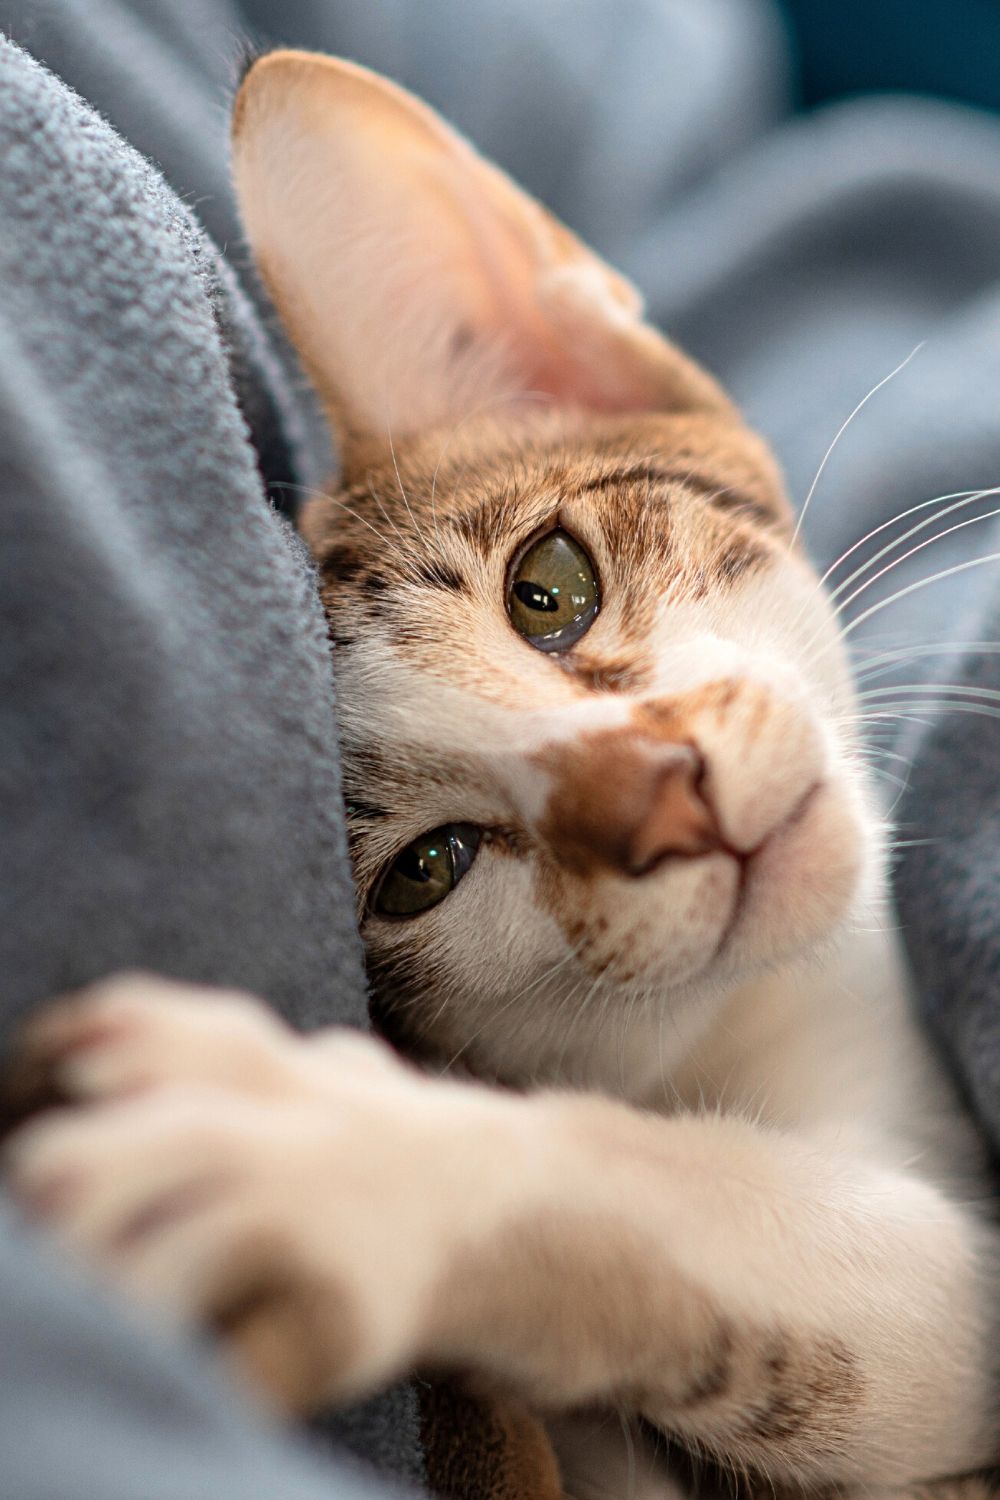 Female cats getting more affectionate is another sign that she's in heat